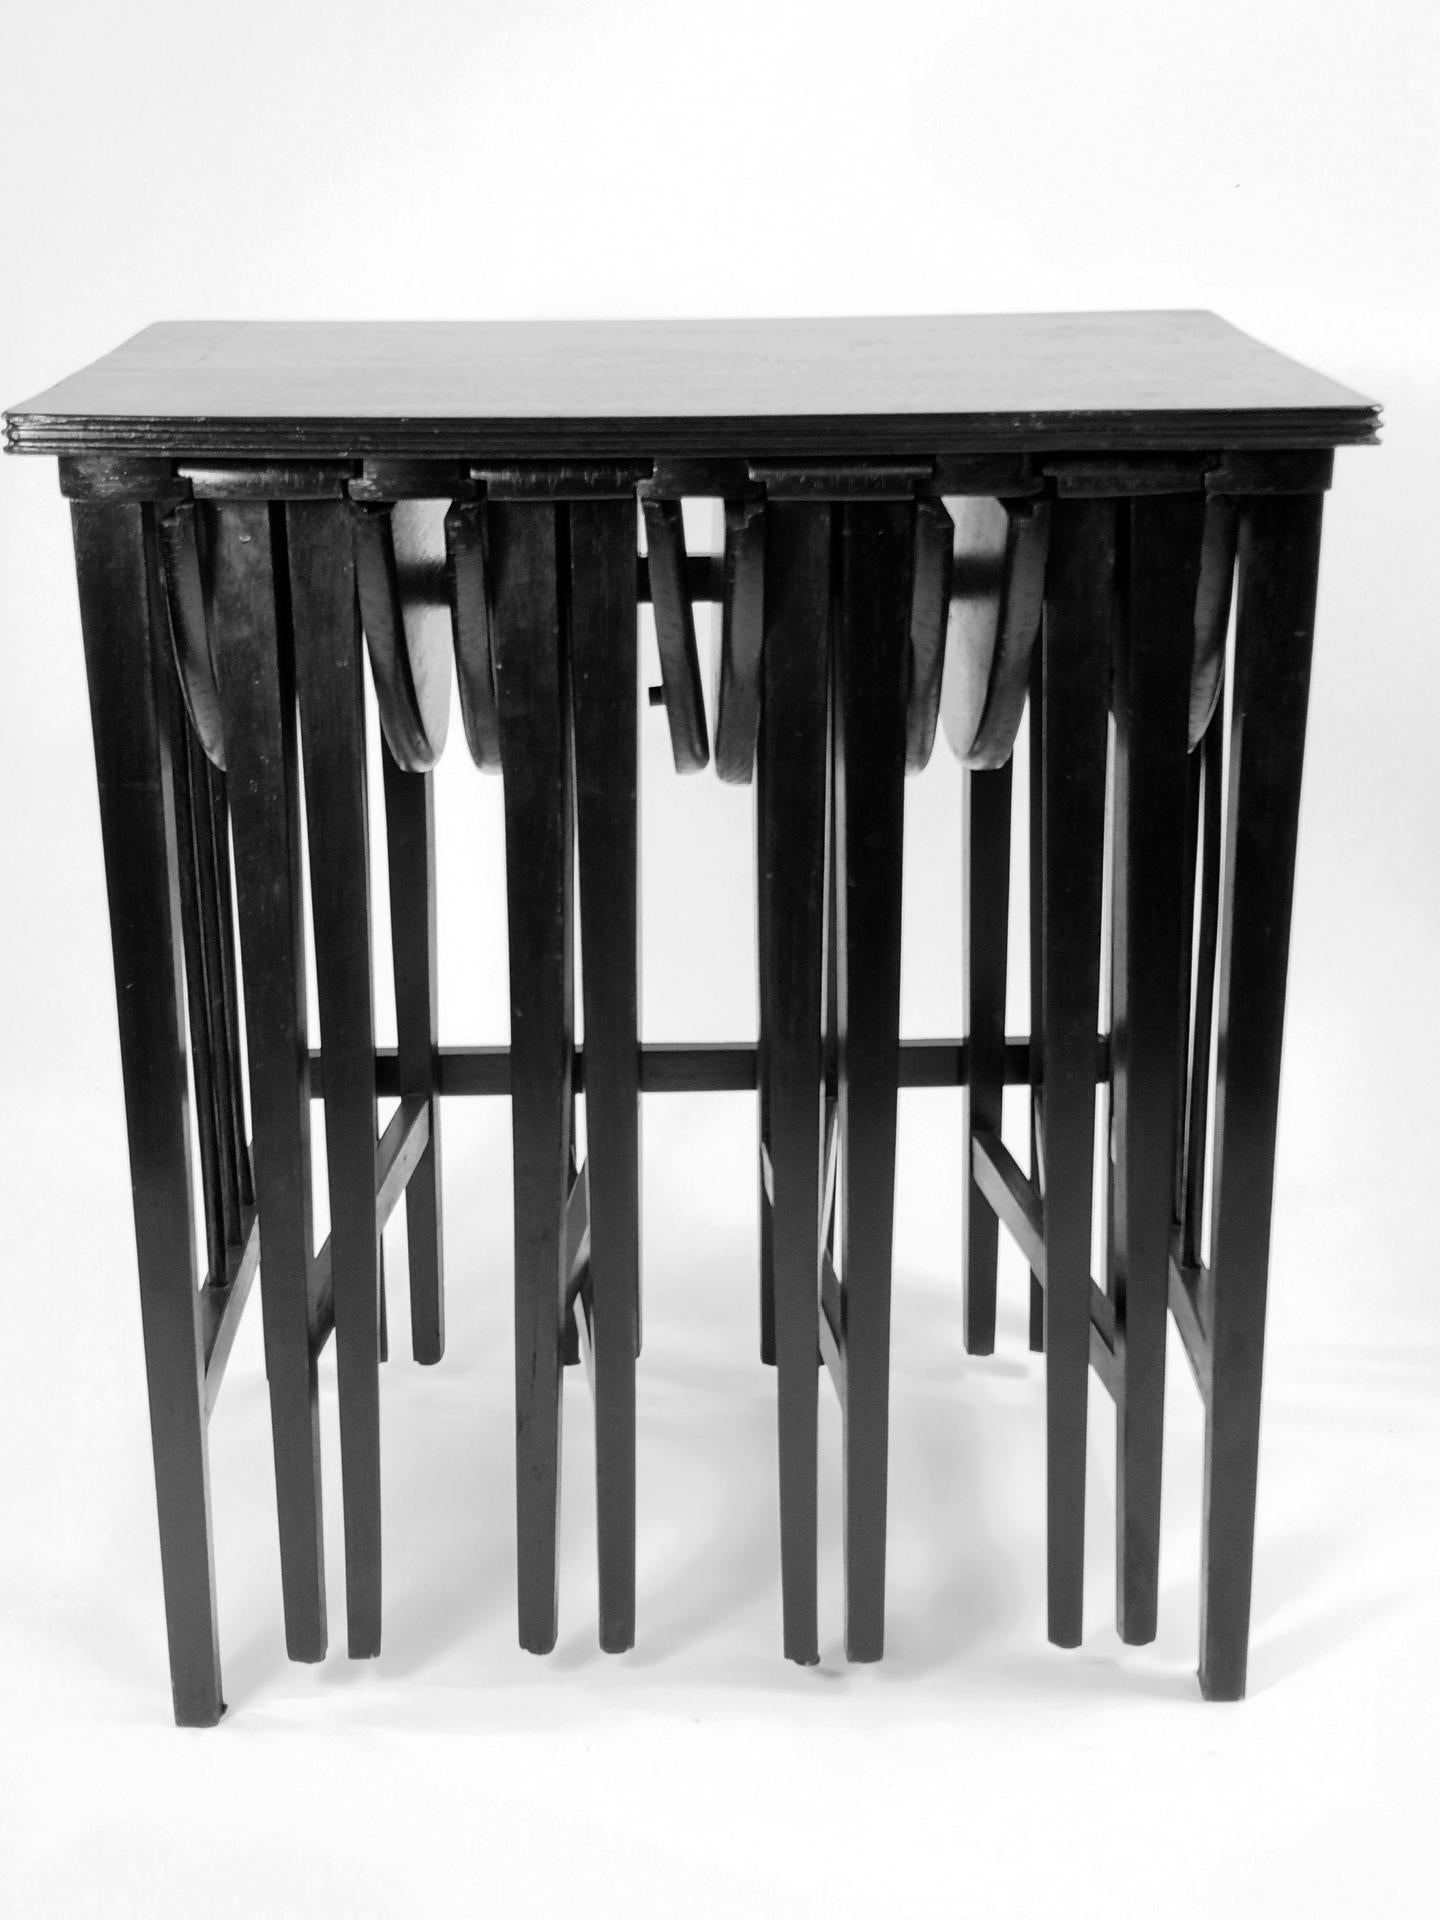 Rare Set of Openable Nesting Tables From Vienna by Mundus, 1910's For Sale 1